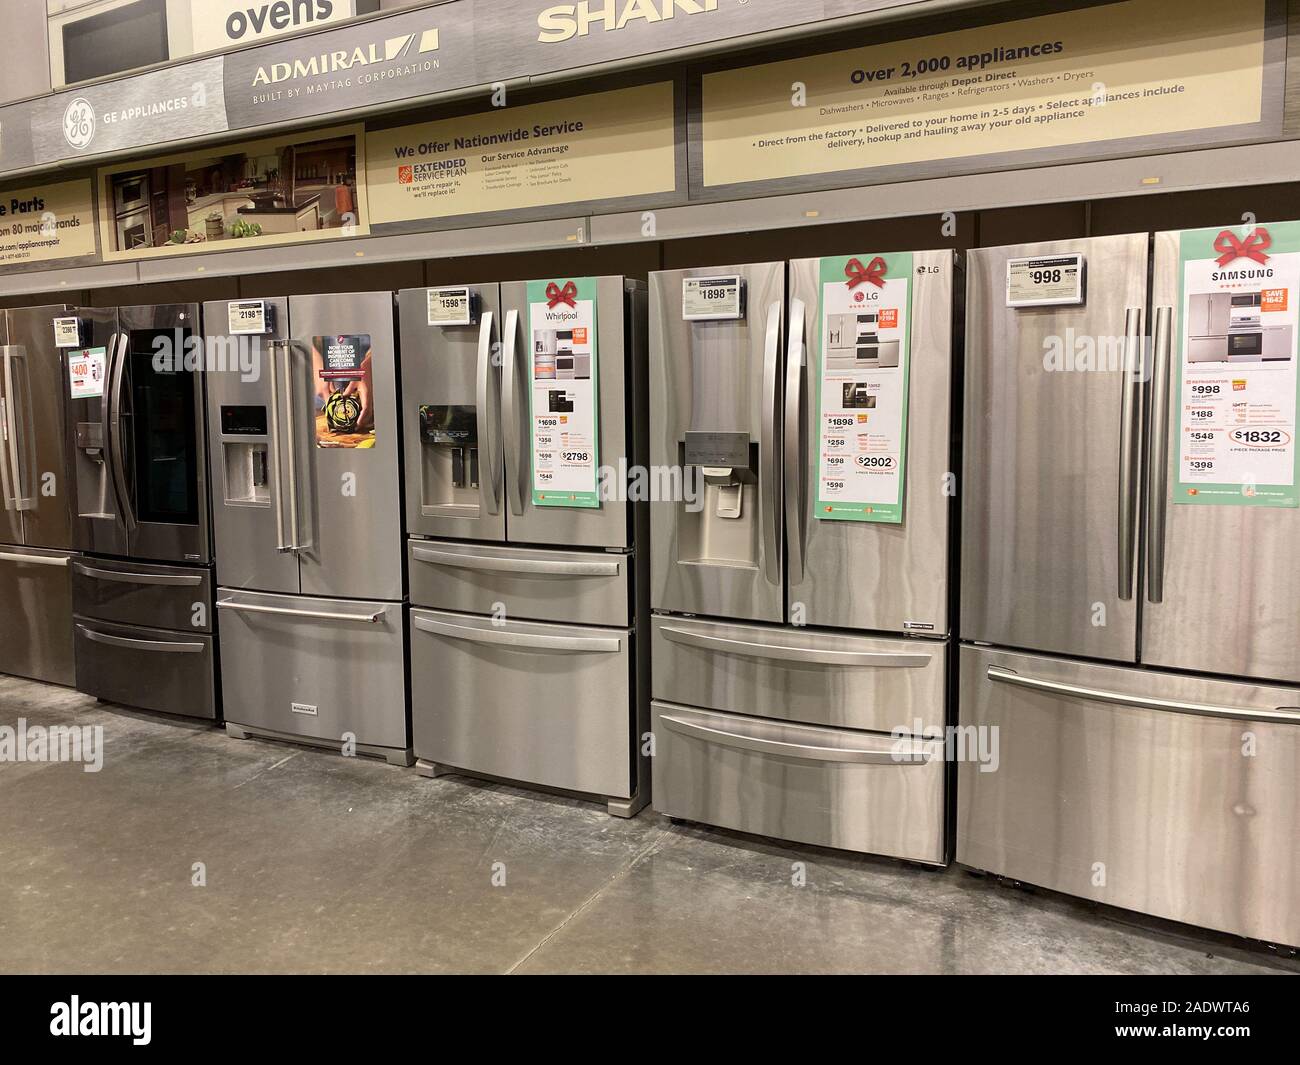 https://c8.alamy.com/comp/2ADWTA6/orlandoflusa-111119-a-row-of-stainless-steel-french-door-refrigerators-on-sale-at-a-home-depot-store-2ADWTA6.jpg